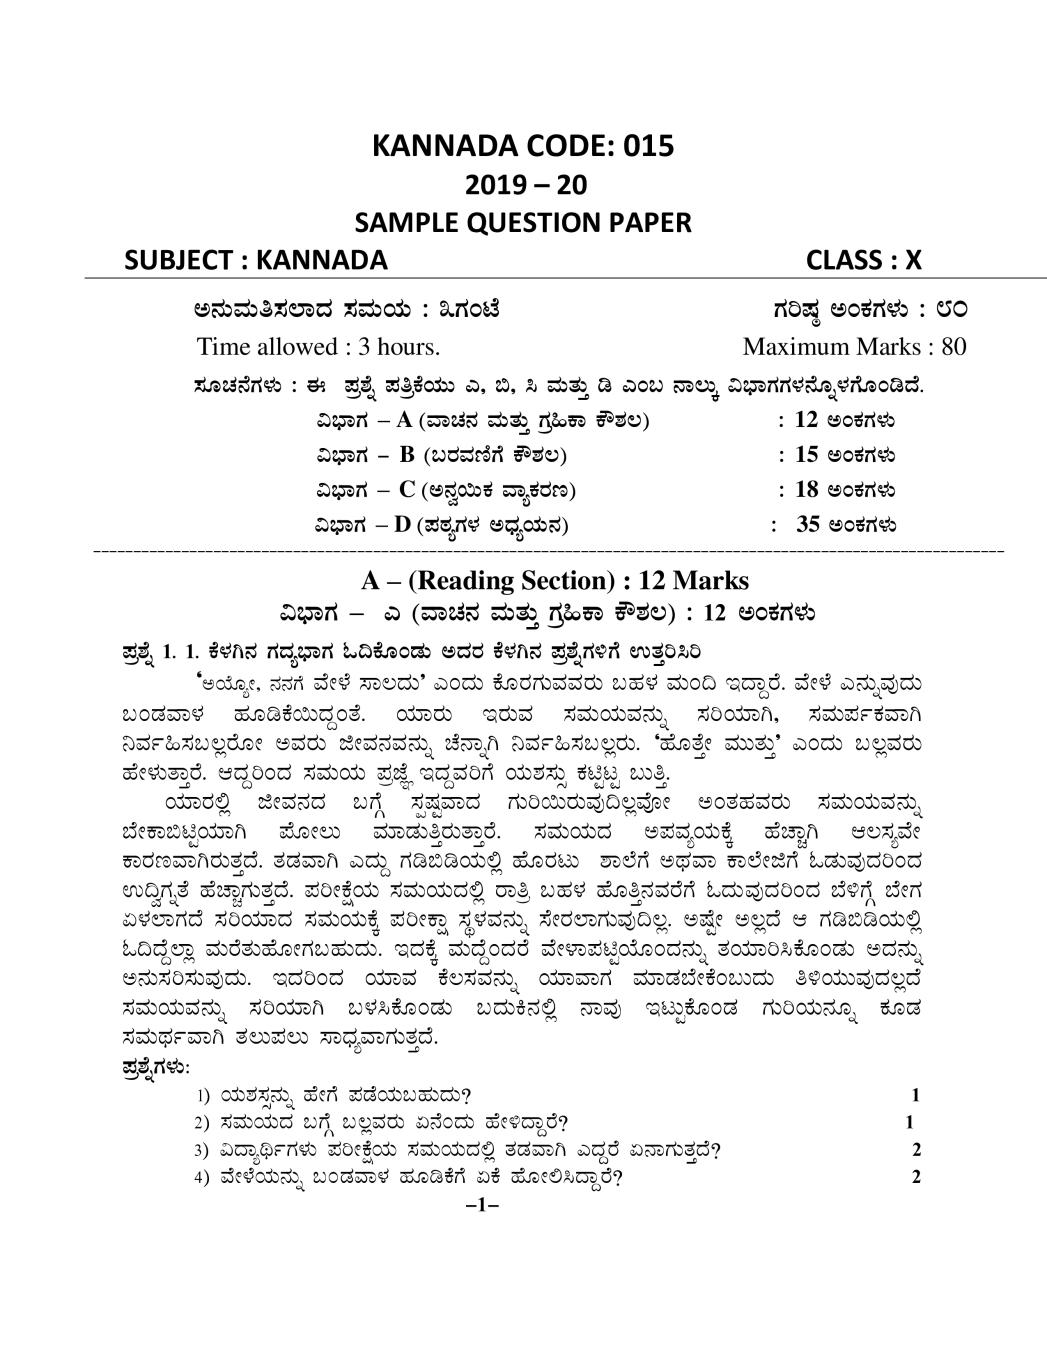 CBSE Class 10 Sample Paper 2020 for kannada - Page 1